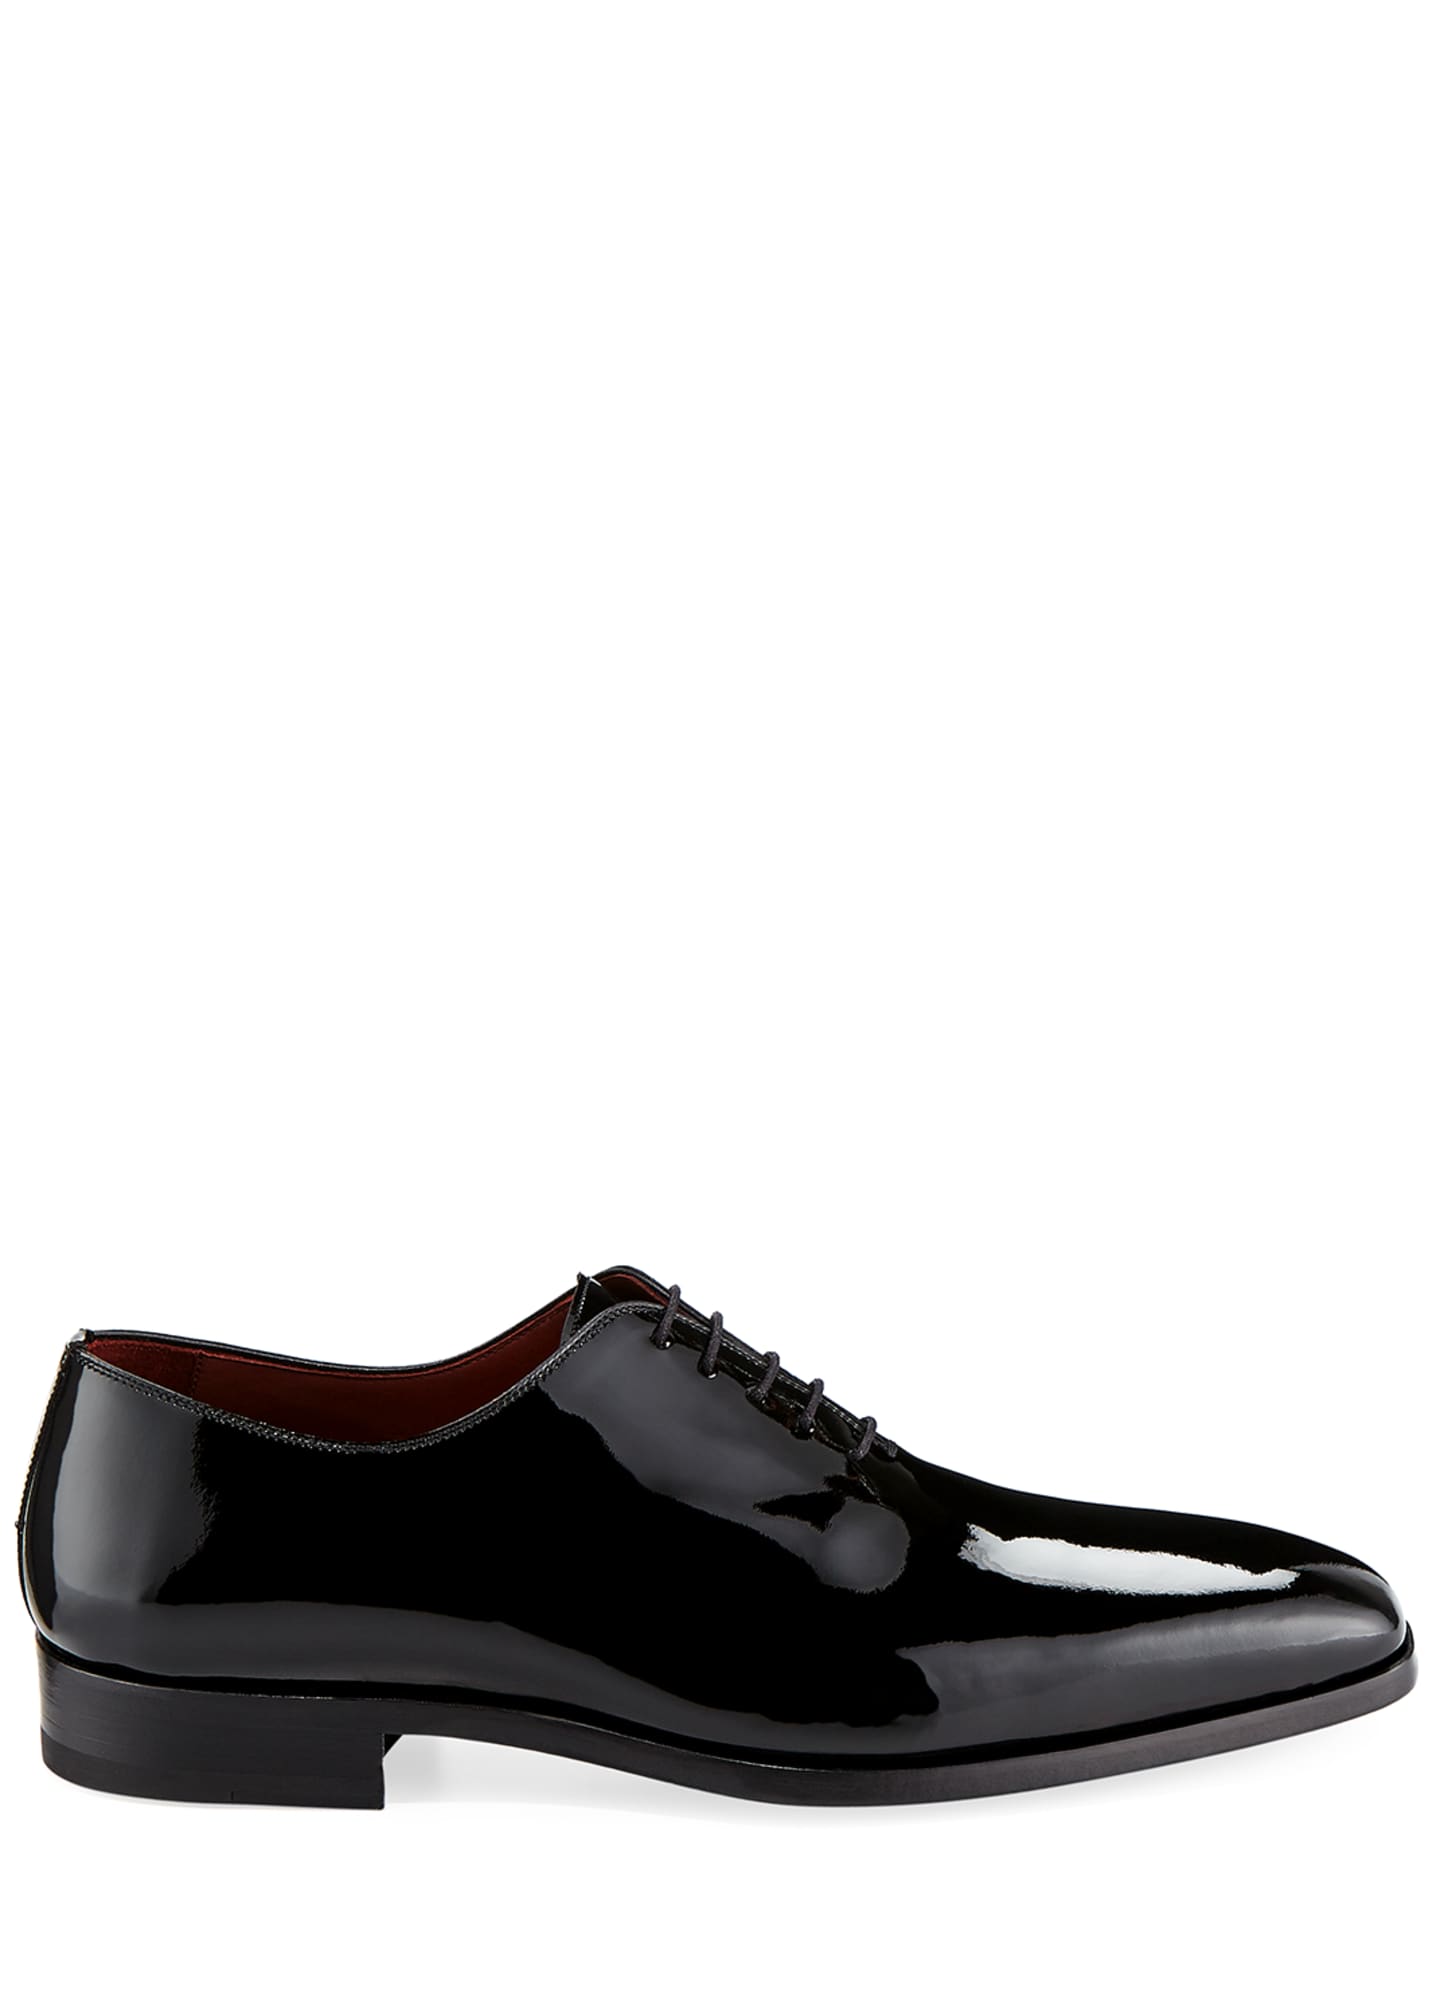 Magnanni for Neiman Marcus Men's One-Piece Patent Leather Oxford Shoe ...